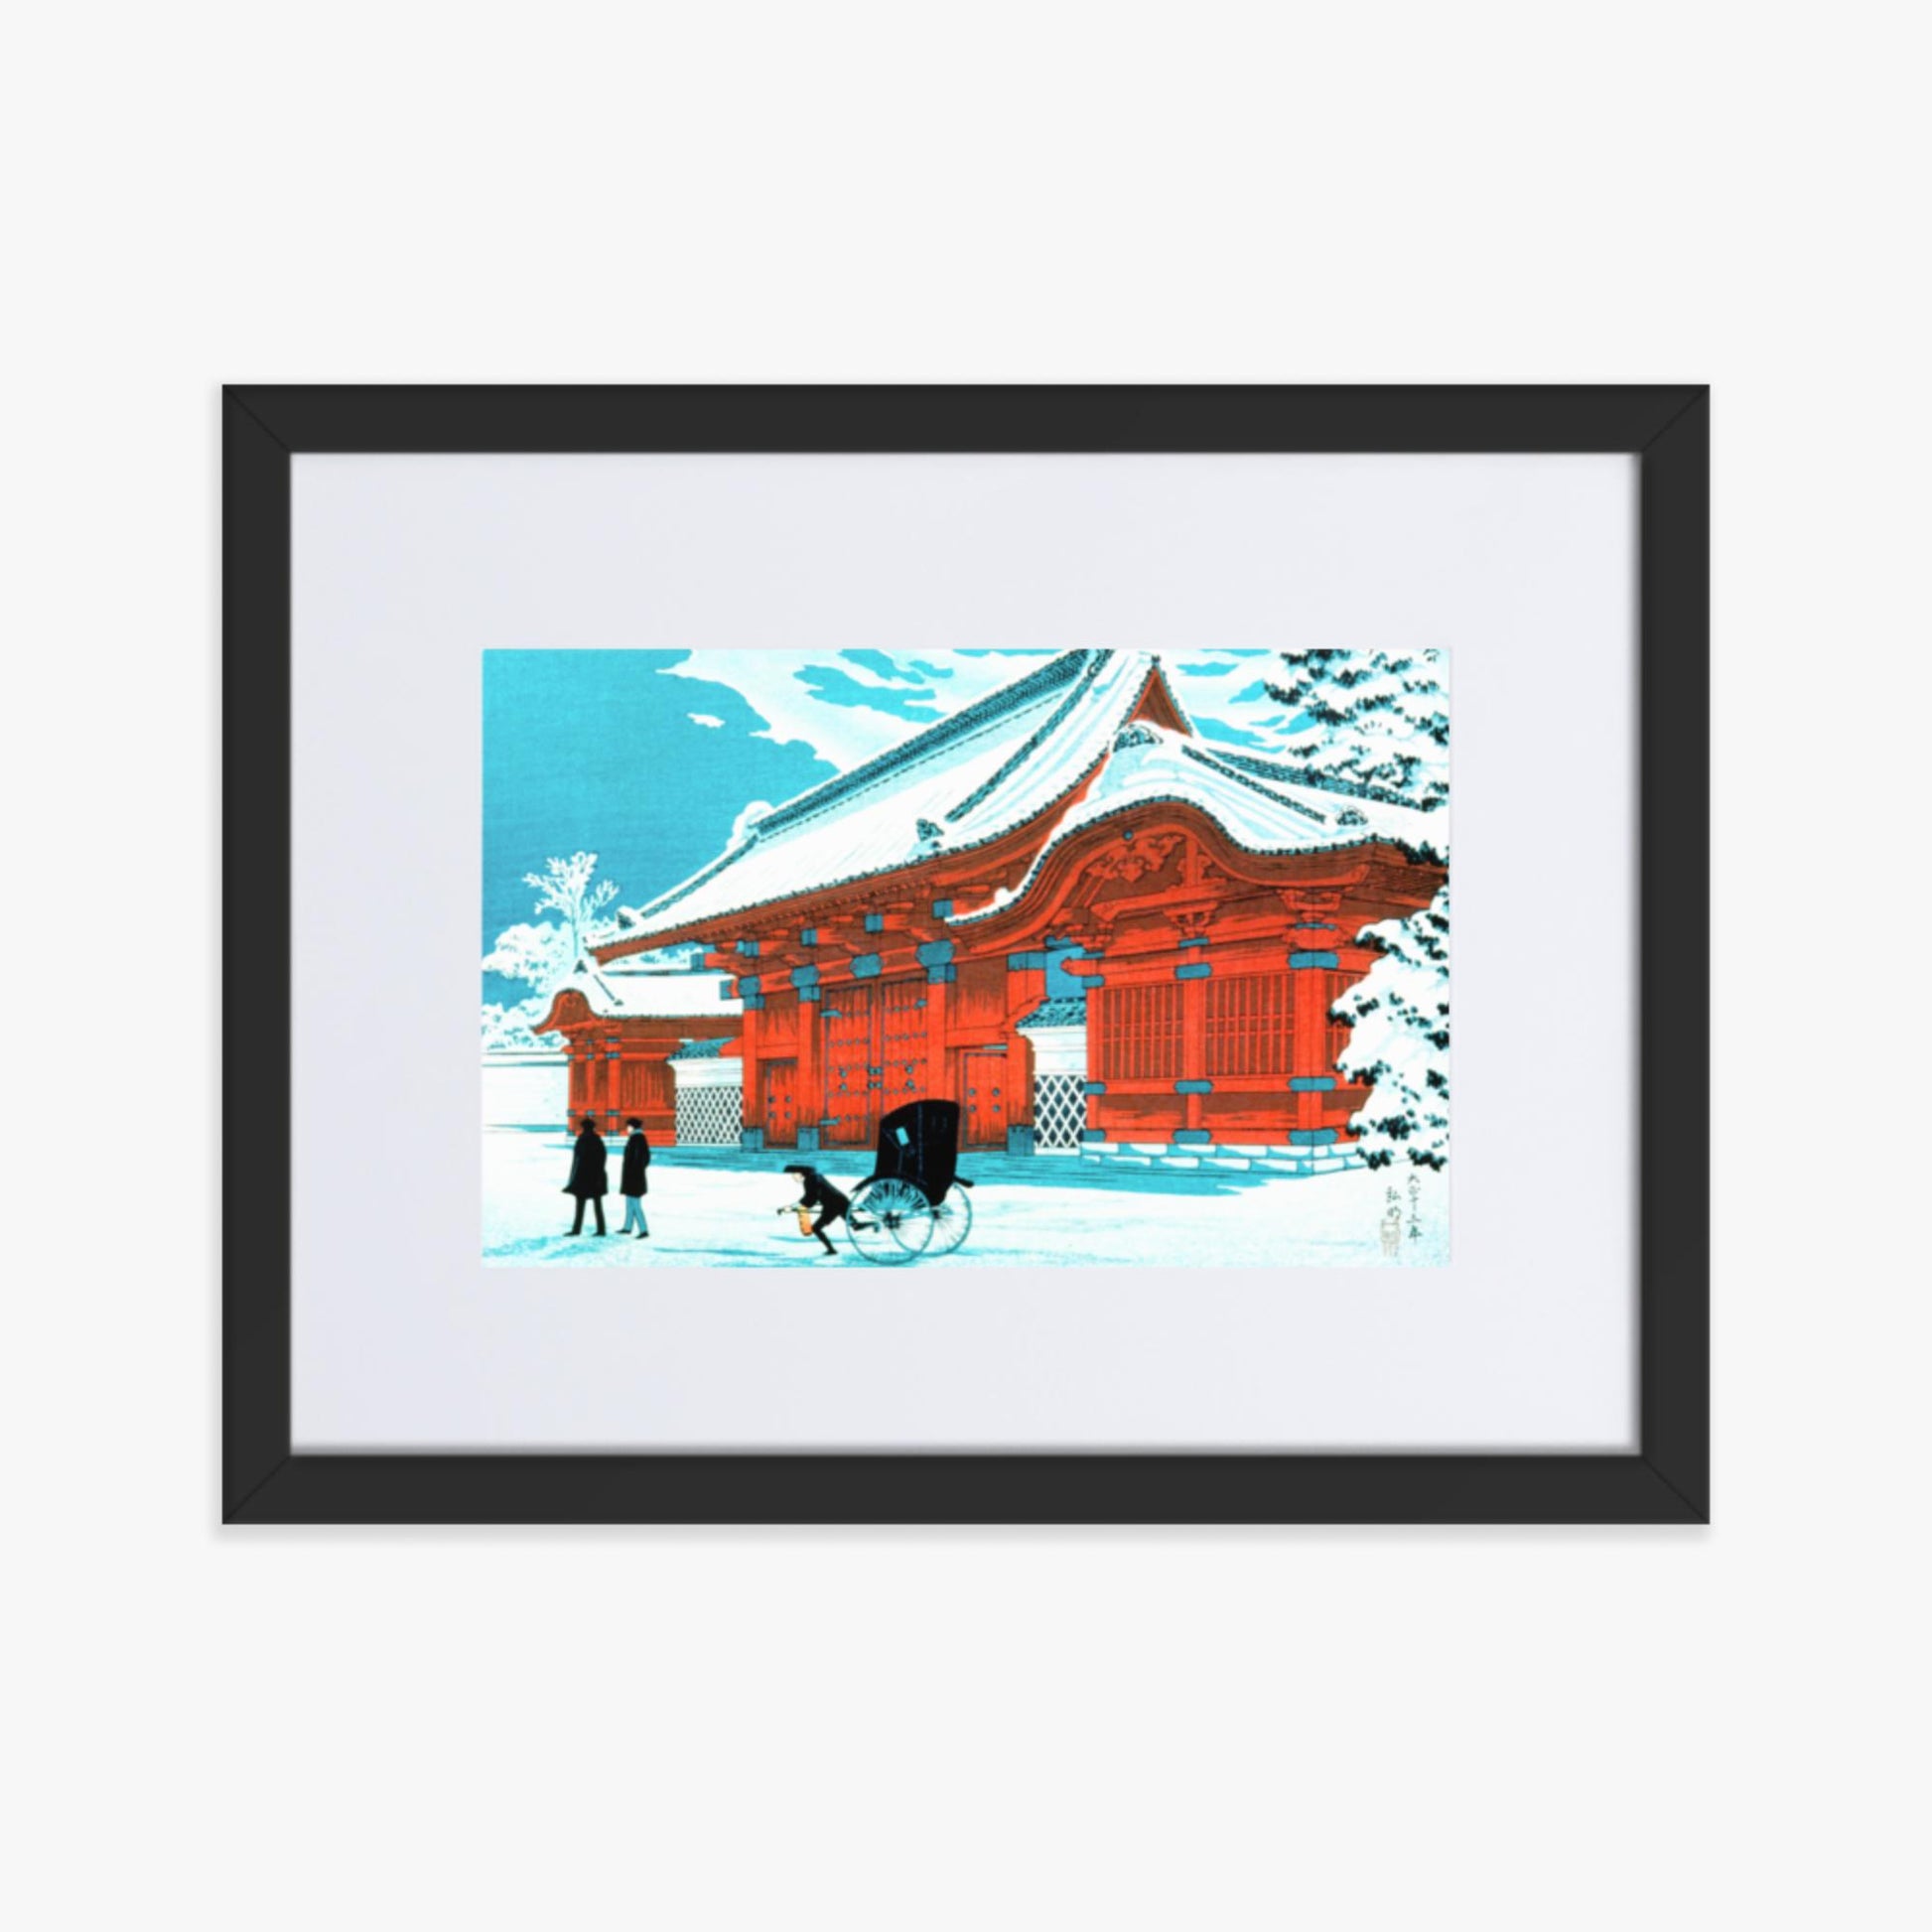 Takahashi Hiroaki (Shōtei) - The Red Gate of Hongo in Snow 30x40 cm Poster With Black Frame